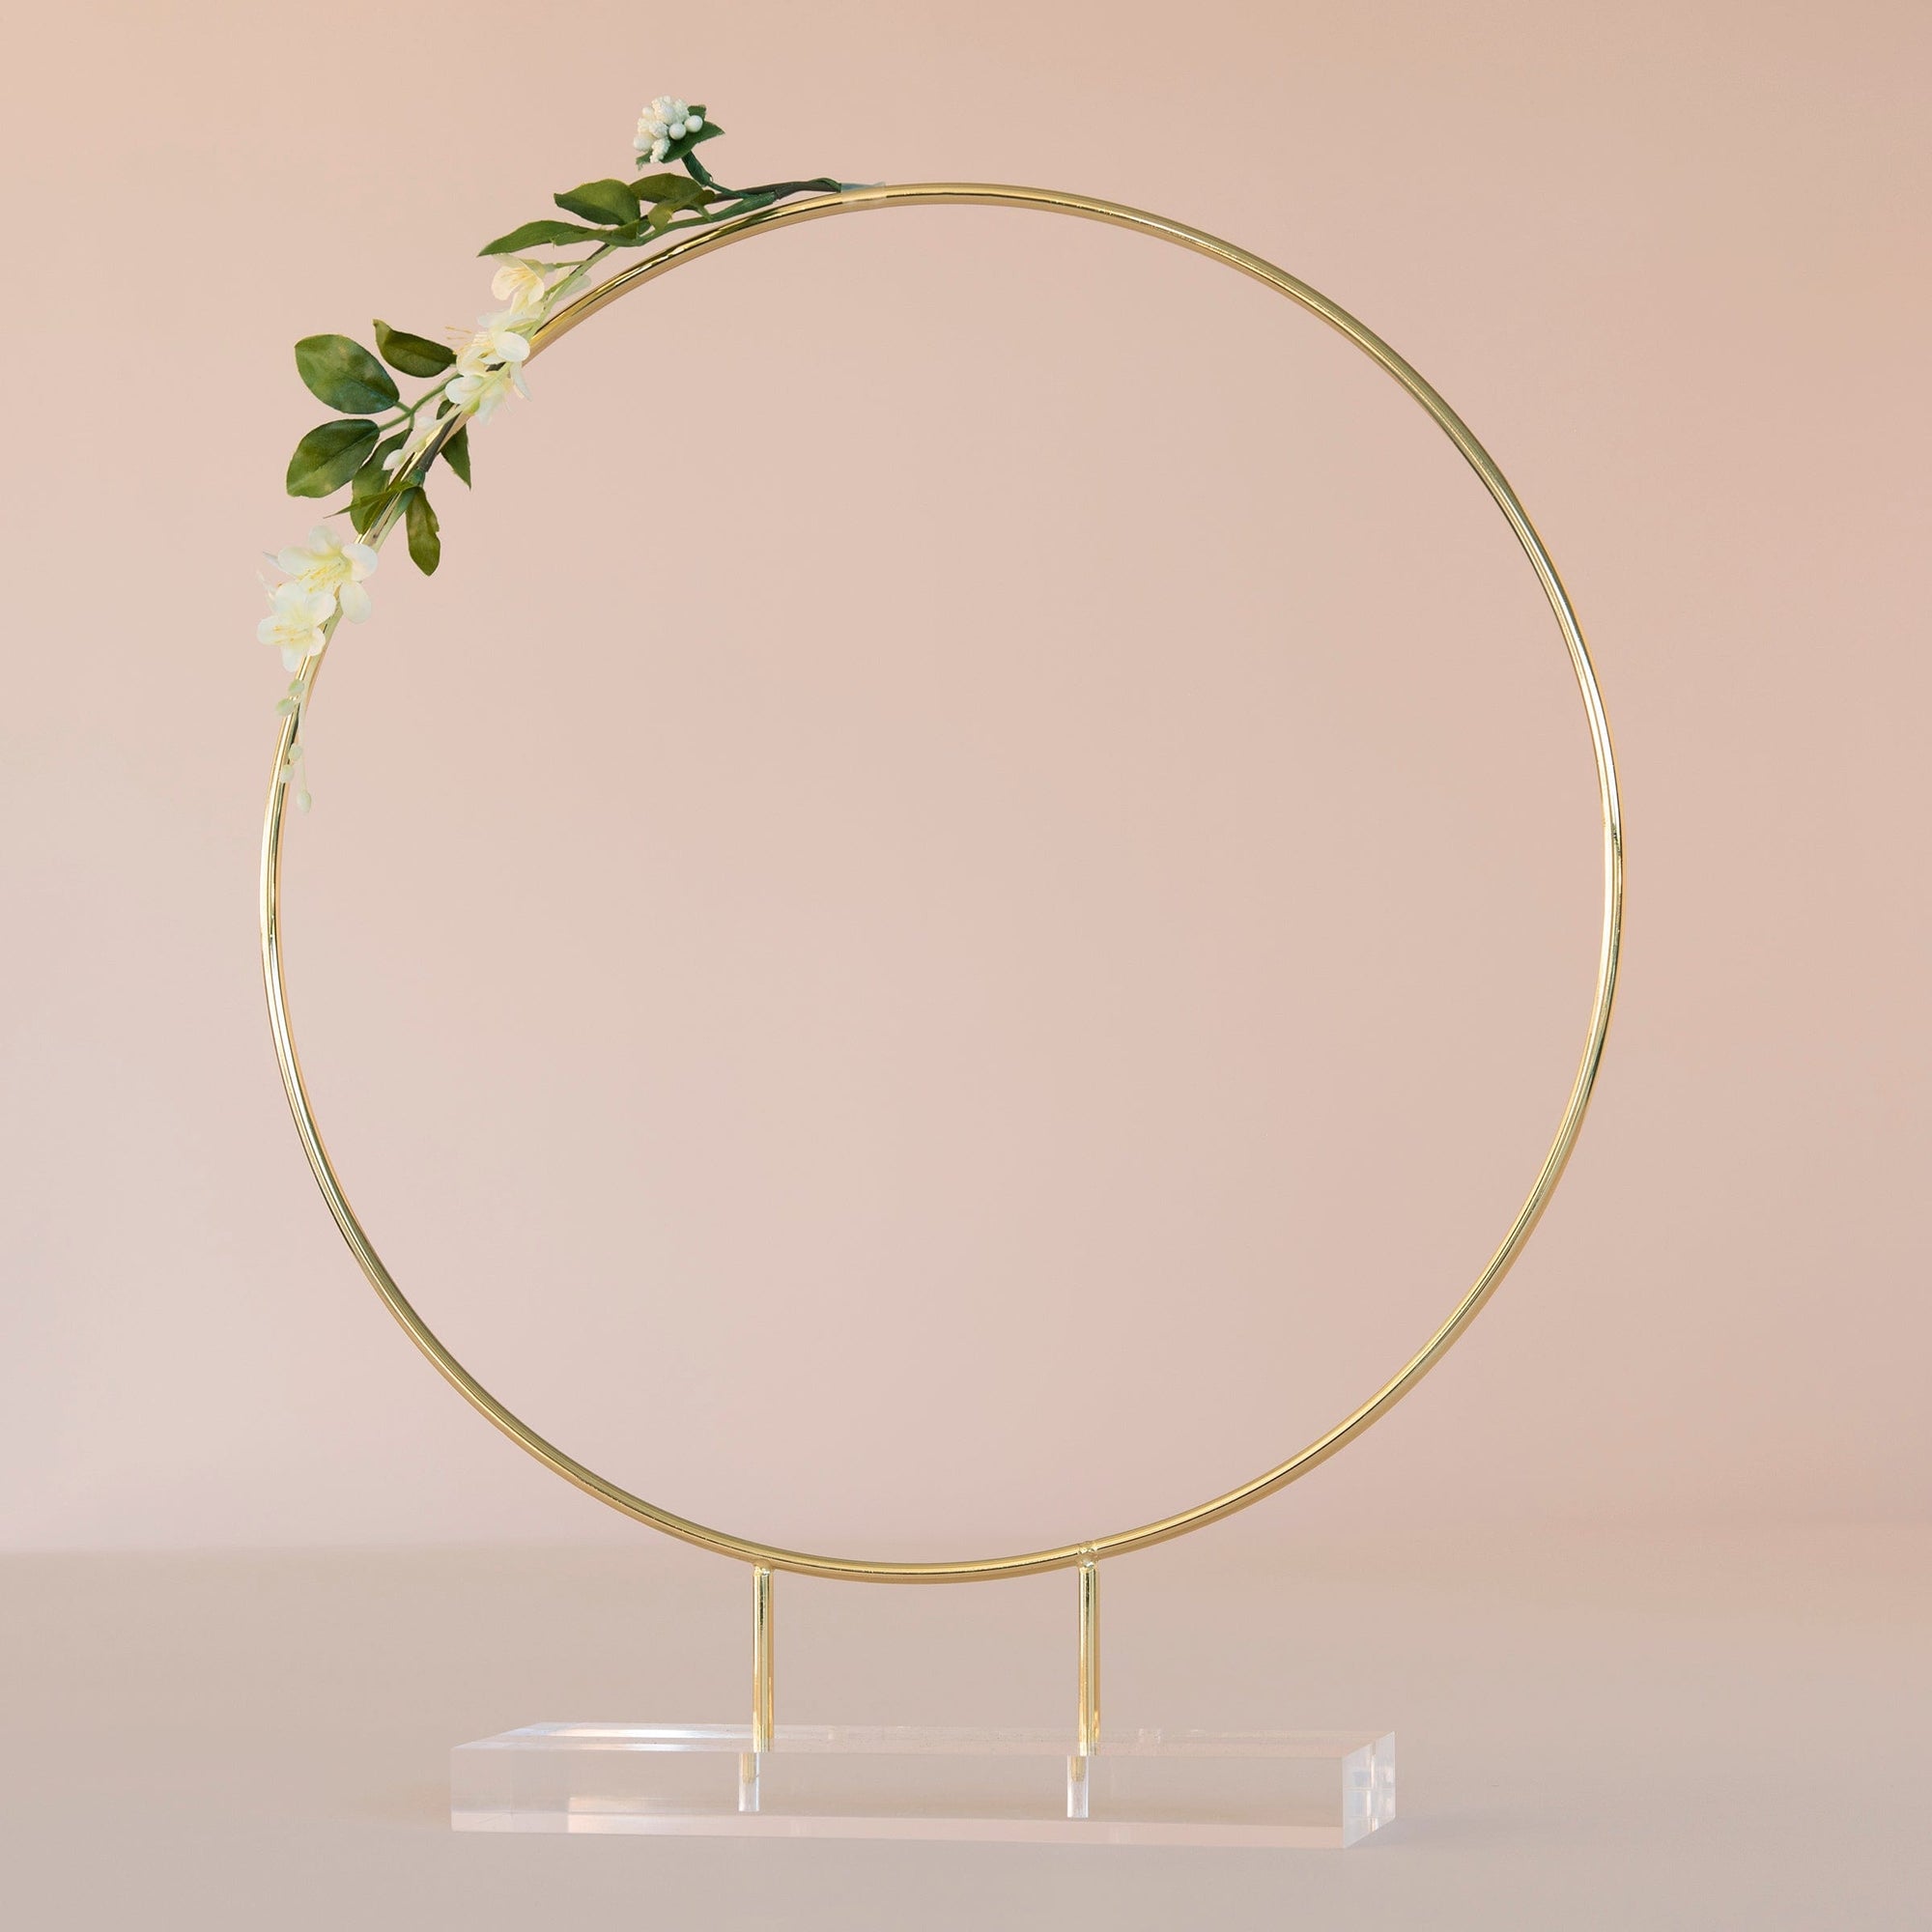 Decor Hoop Centerpiece with Acrylic Stand Style Me Pretty Centerpiece 55828